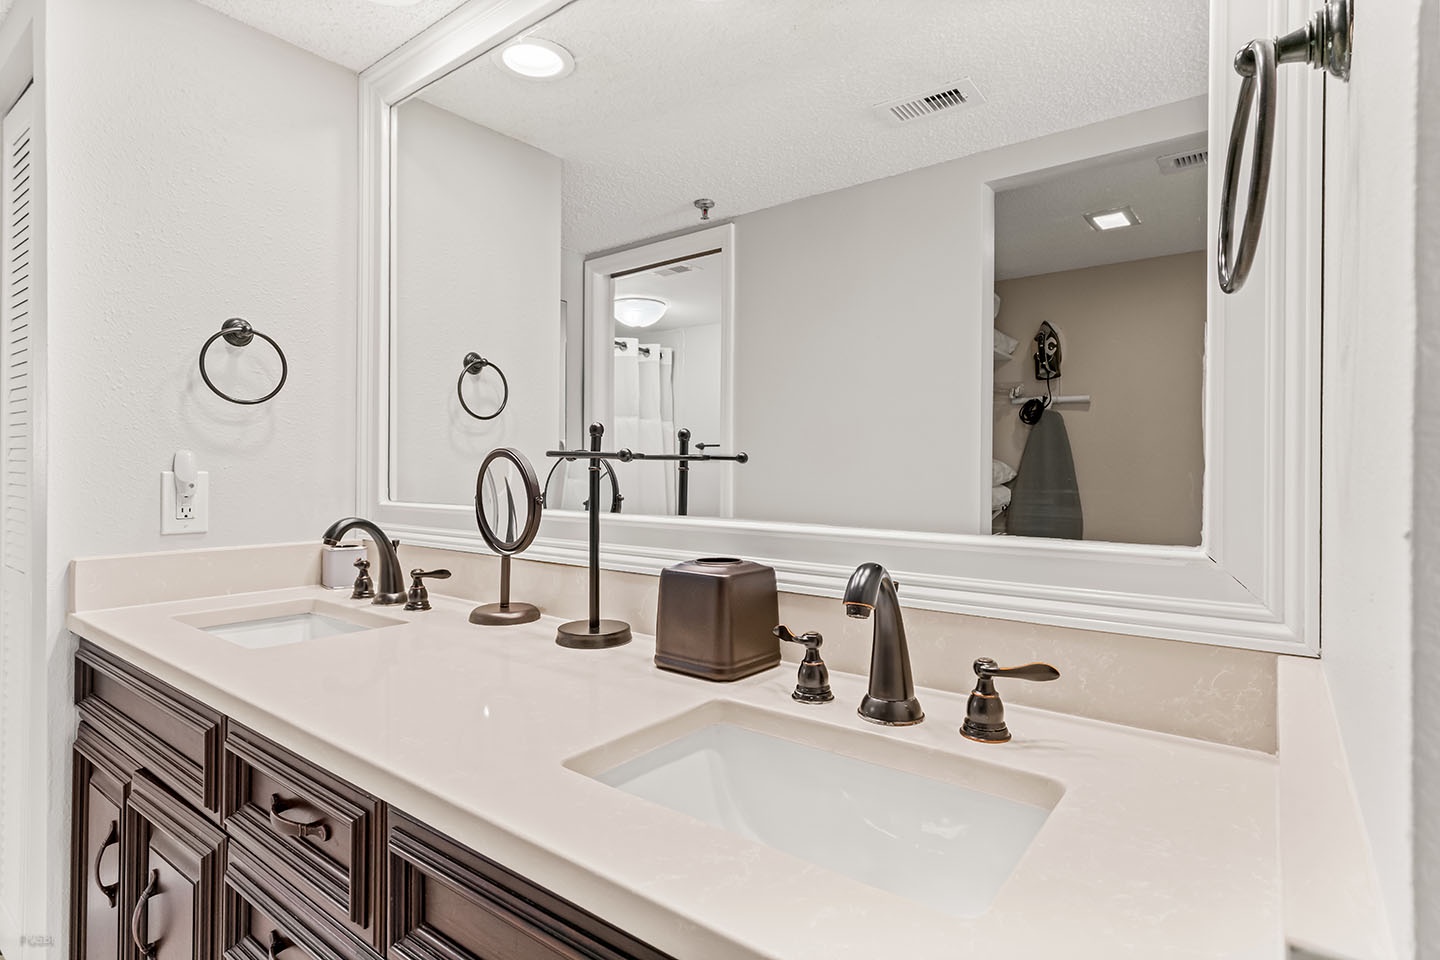 There's plenty of counter space in the Master Bathroom.